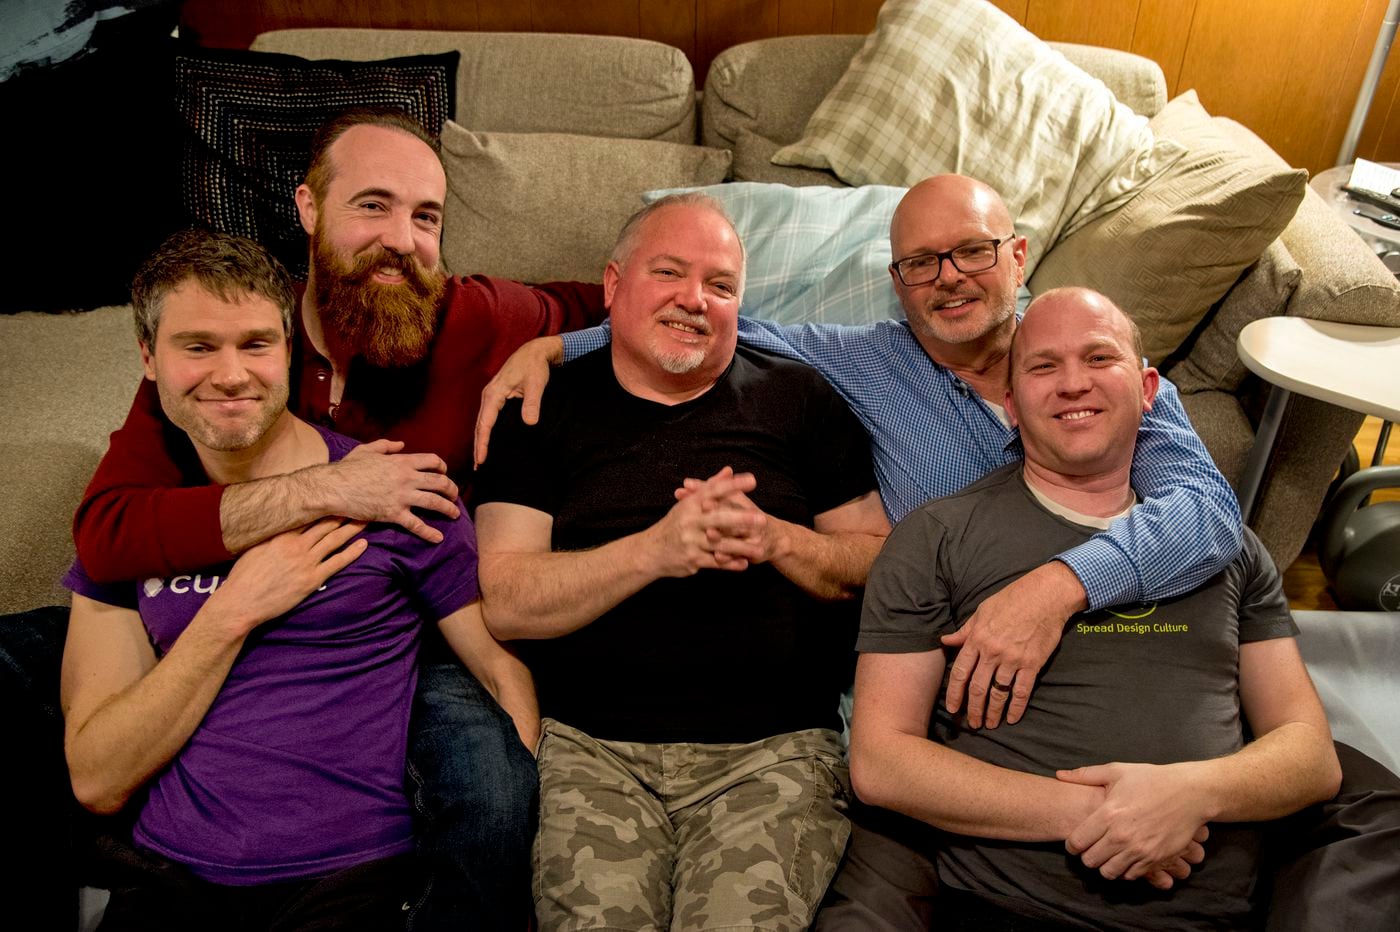 Men’s cuddling group aims to redefine masculinity and heal trauma